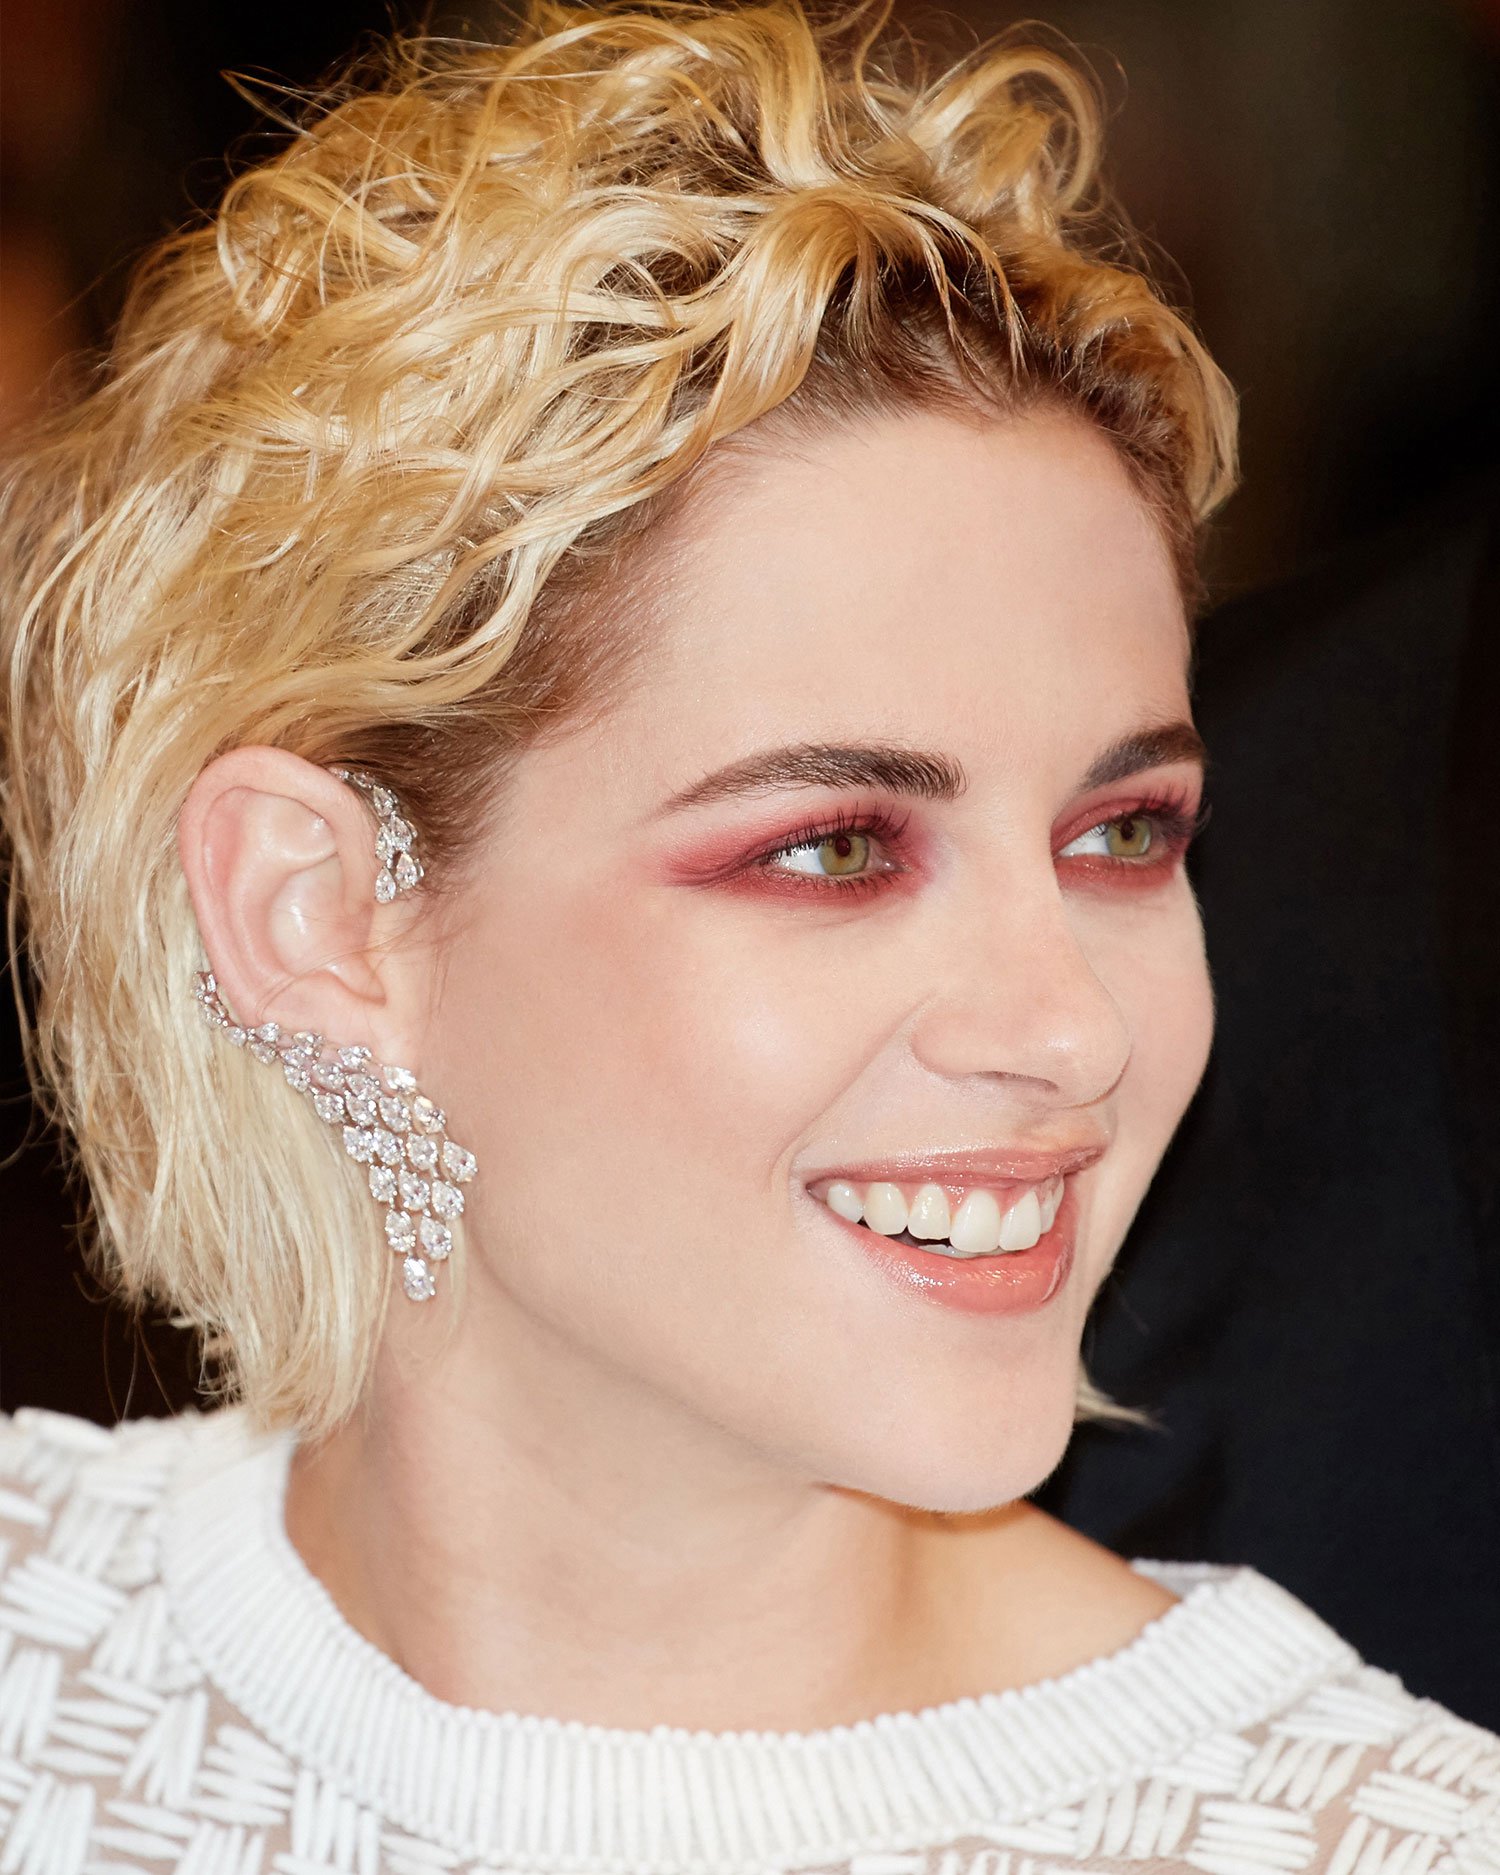 Kristen Stewart Laced Into Combat Boots at Chanel's Metiers d'Art Show